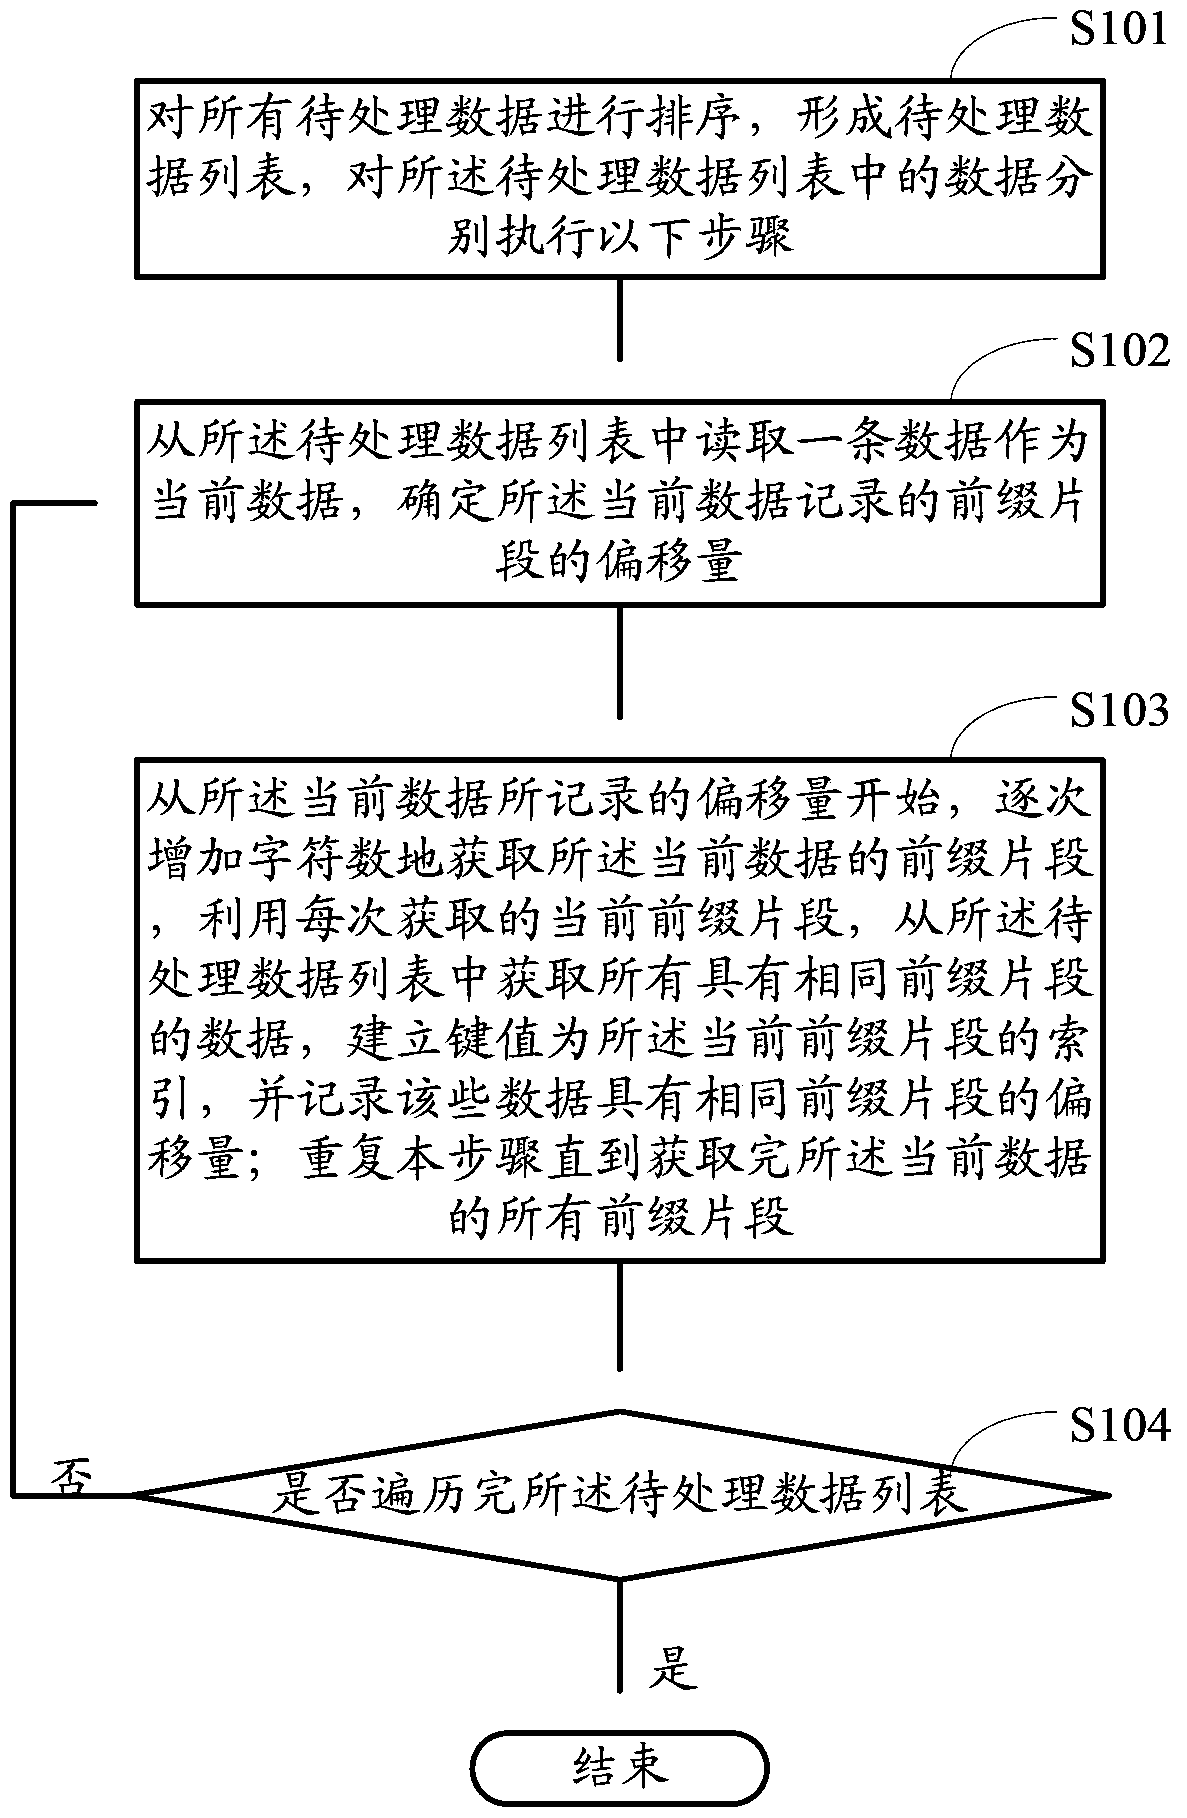 Method for establishing a data index database, method and device for generating search suggestions